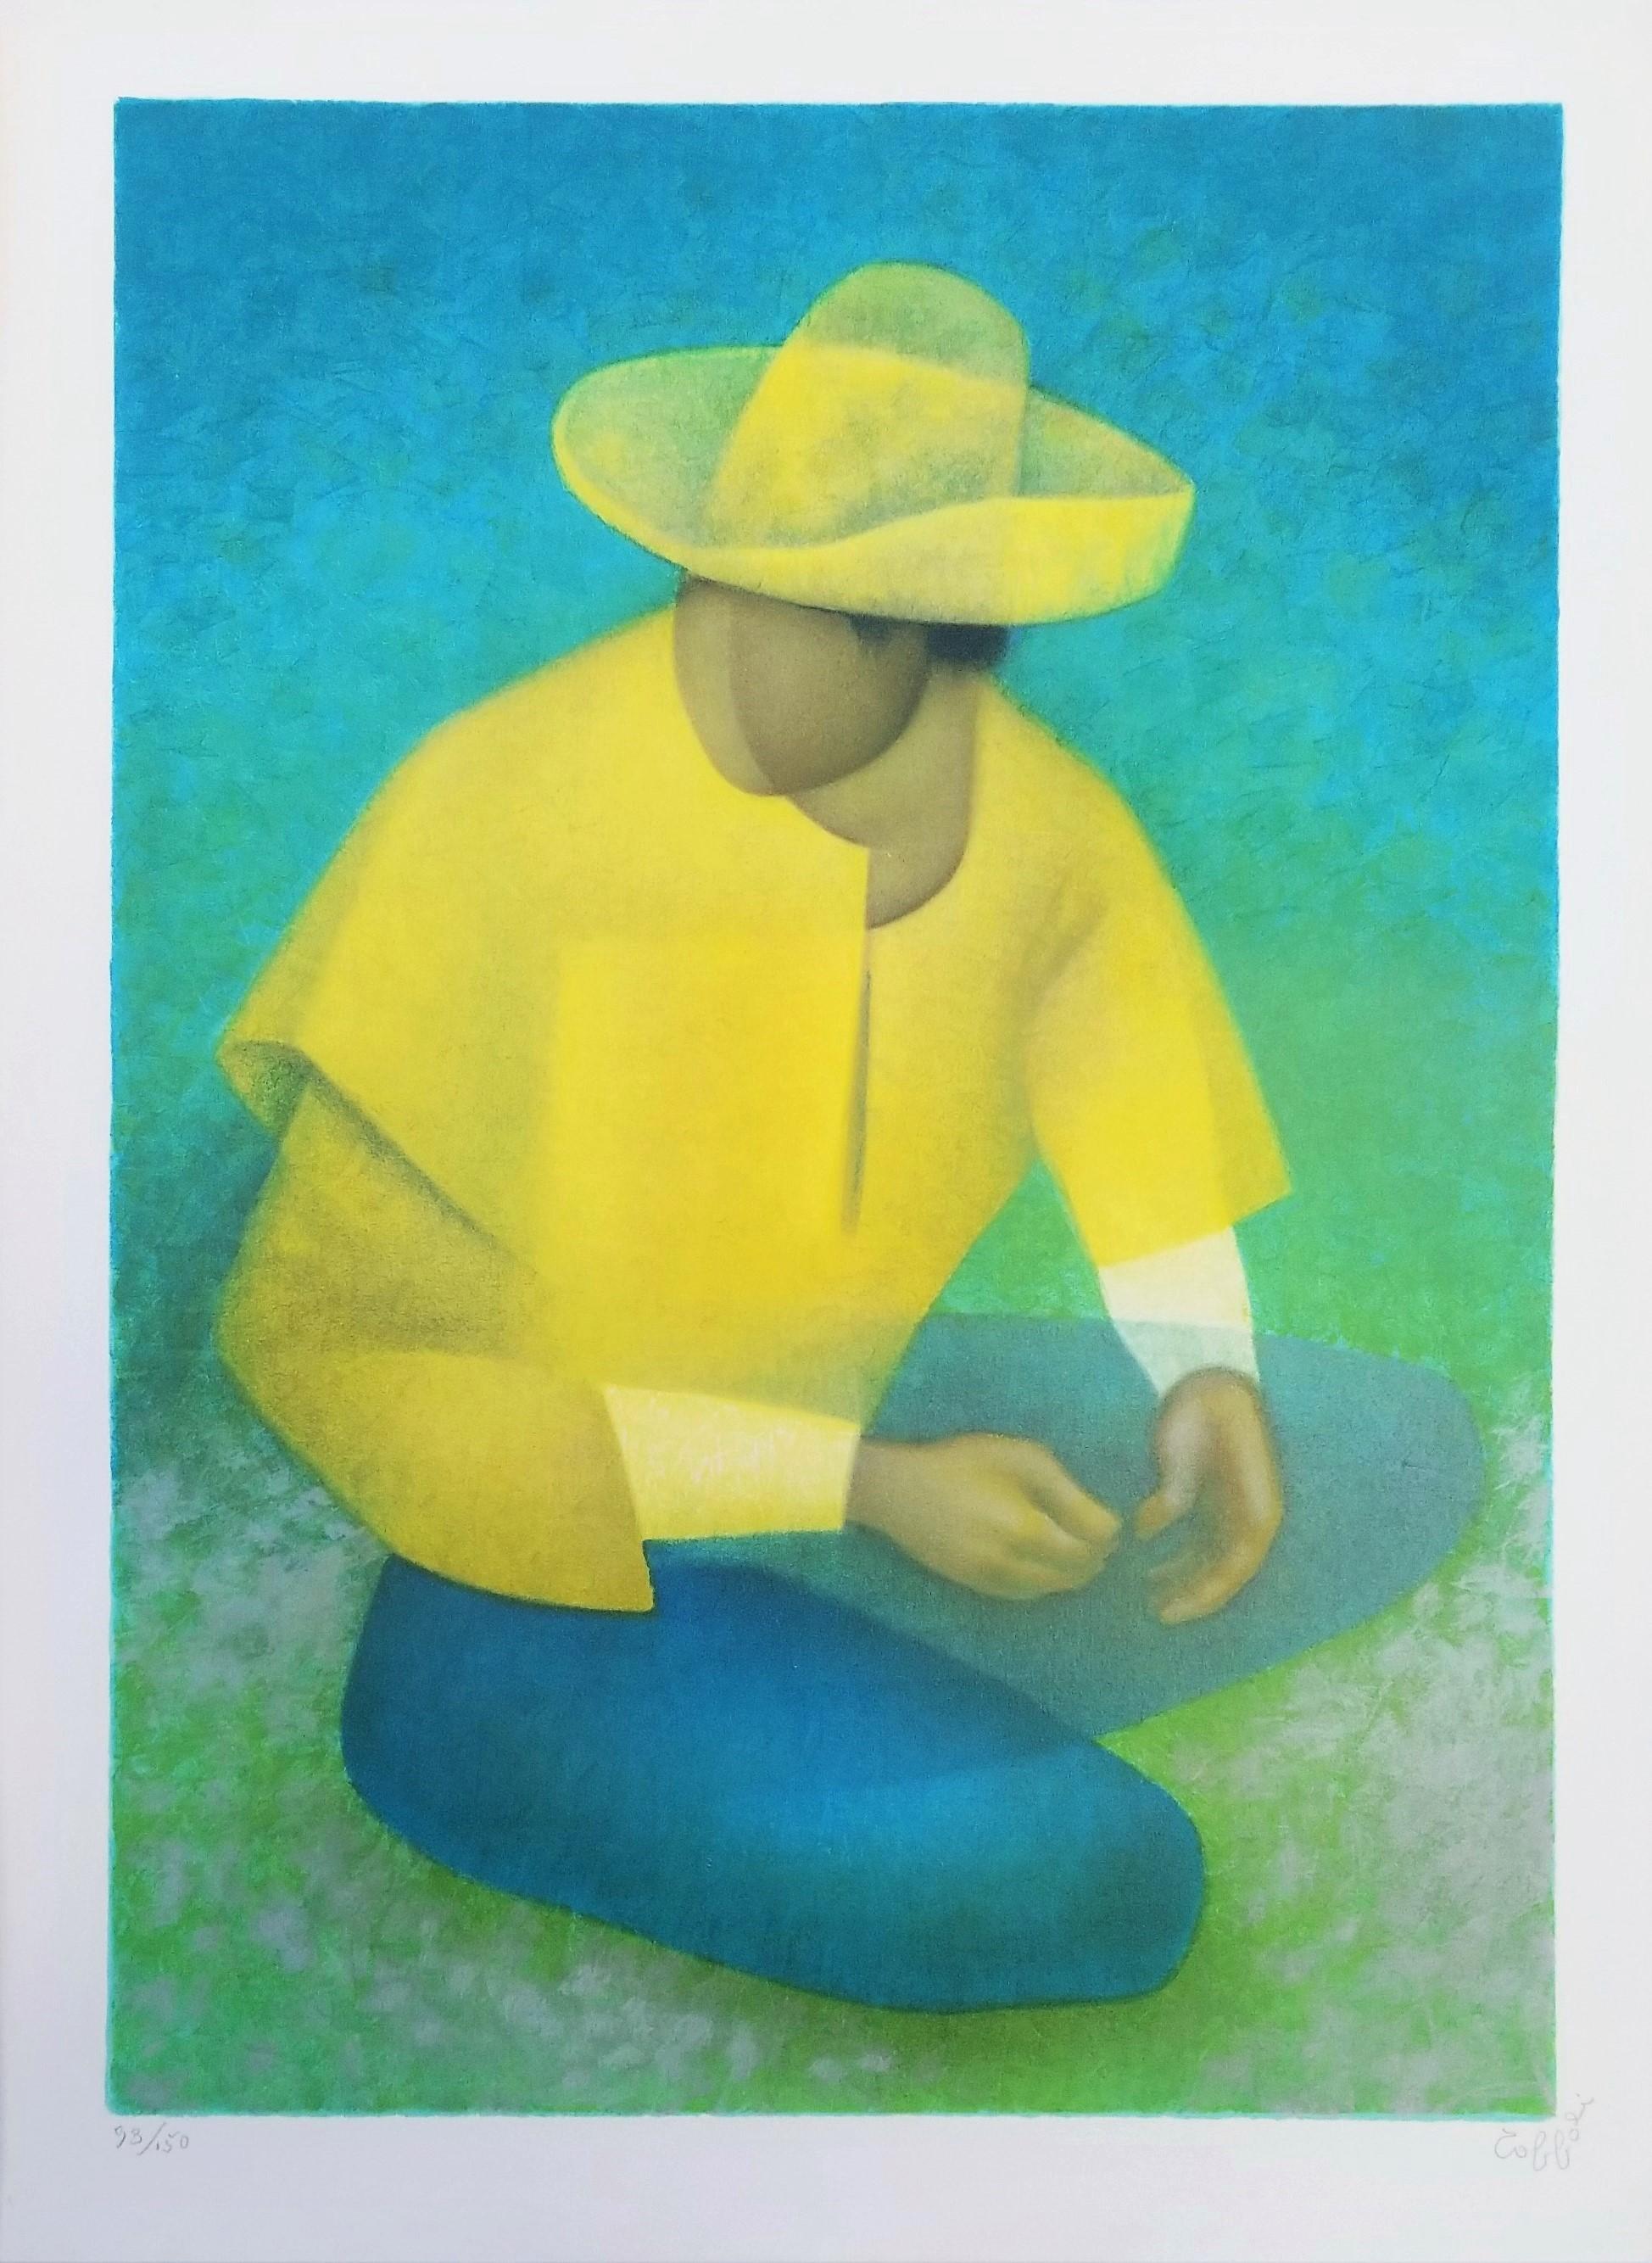 Le Mexicain (Le Gilet Jaune) The Mexican (The Yellow Vest) /// Contemporary Art - Print by Louis Toffoli